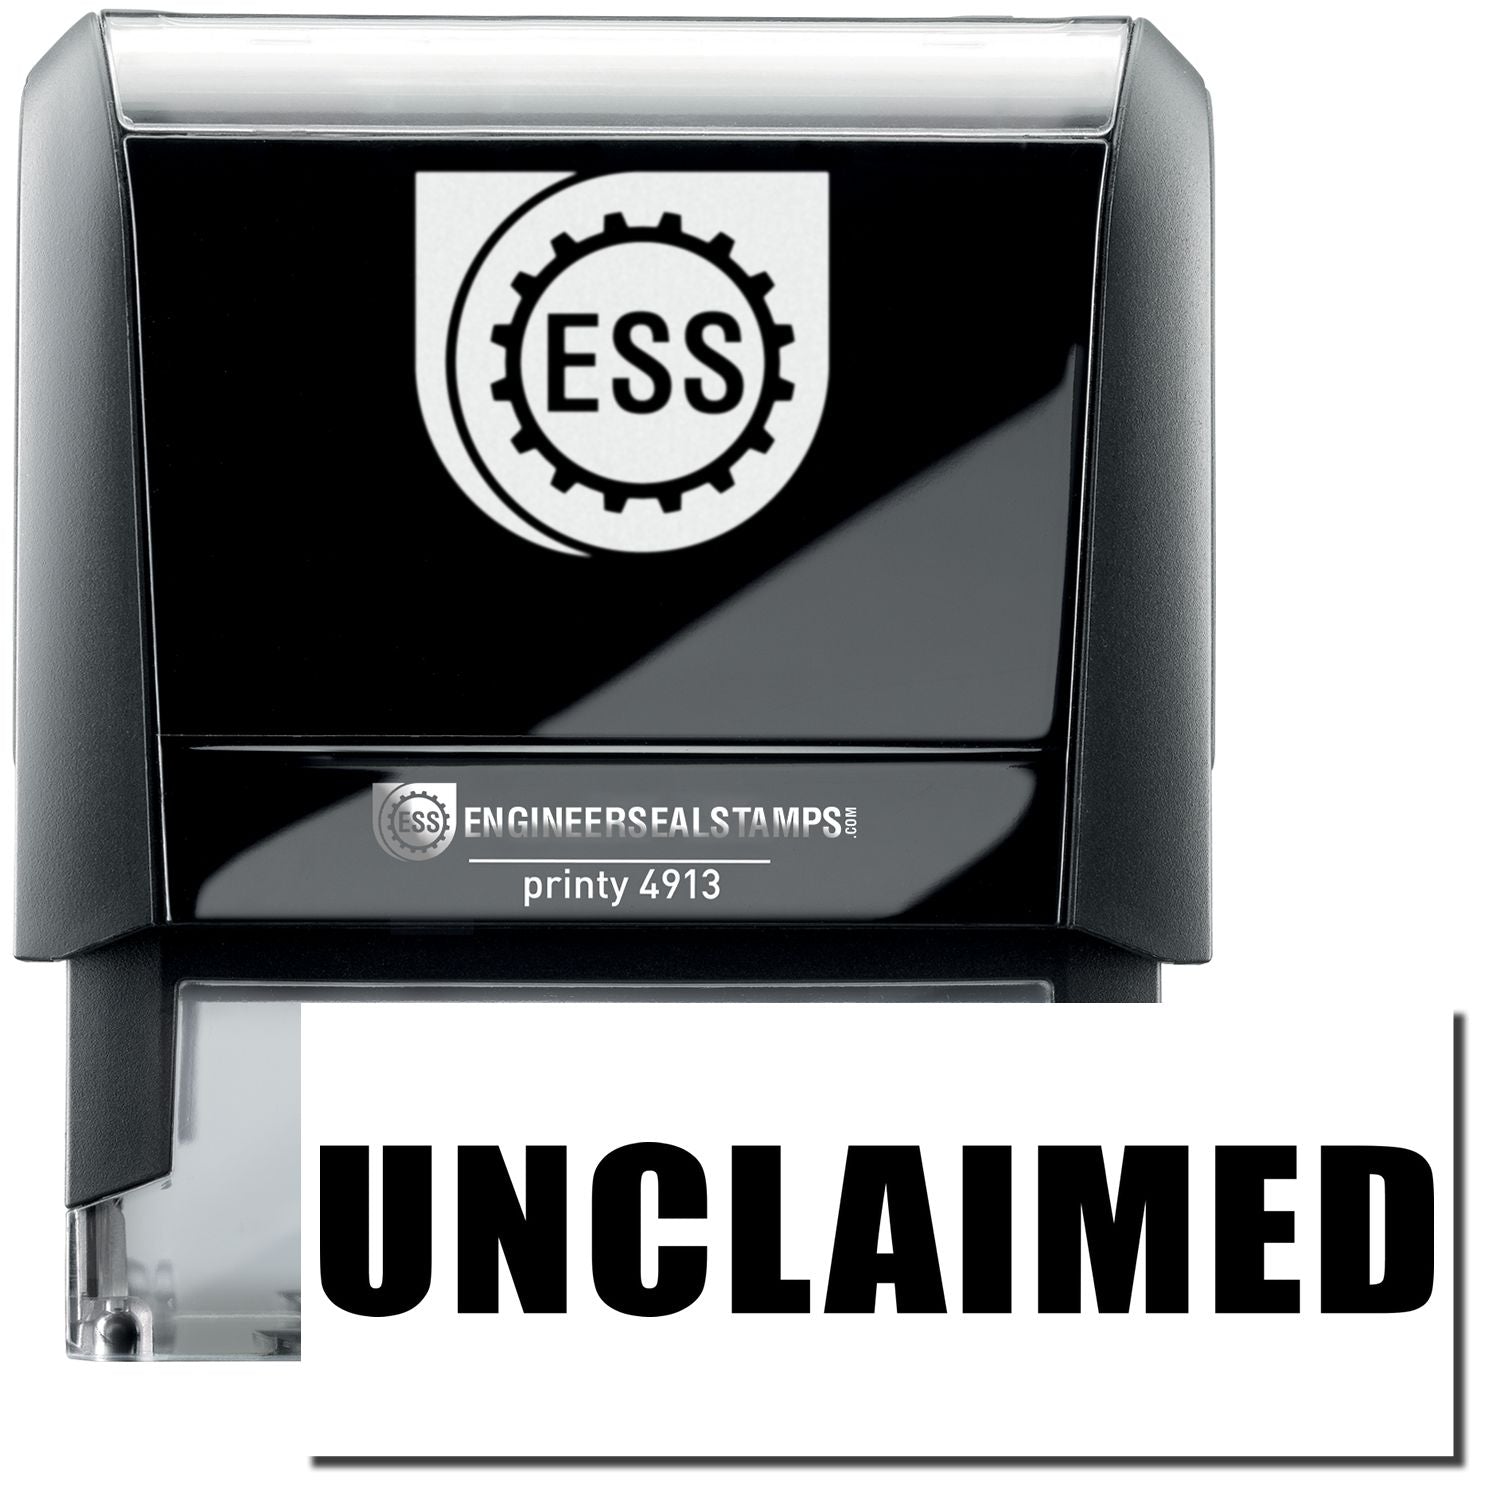 A self-inking stamp with a stamped image showing how the text "UNCLAIMED" in a large font is displayed by it after stamping.